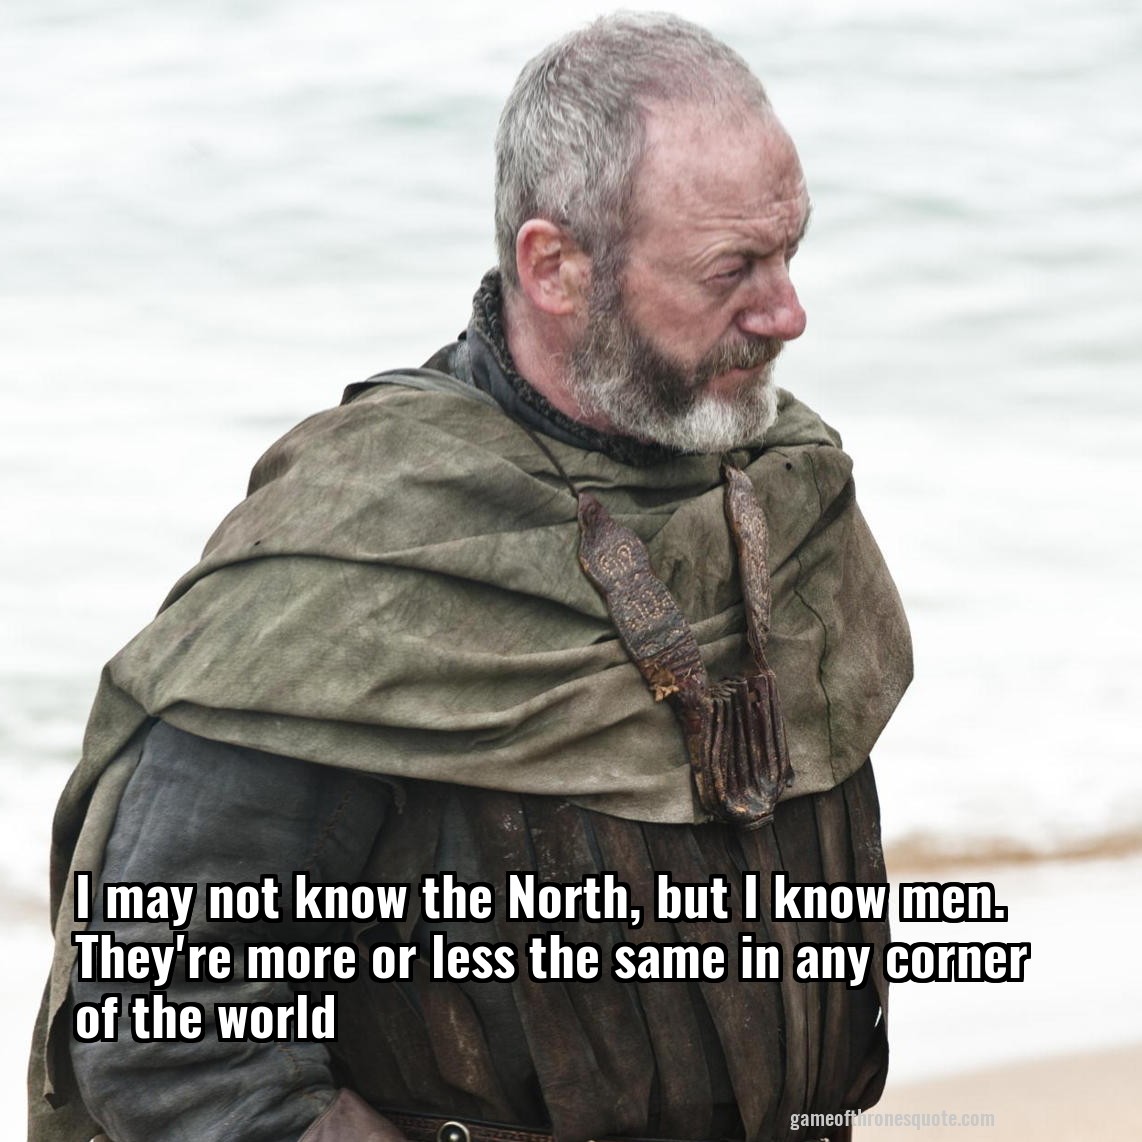 I may not know the North, but I know men. They're more or less the same in any corner of the world